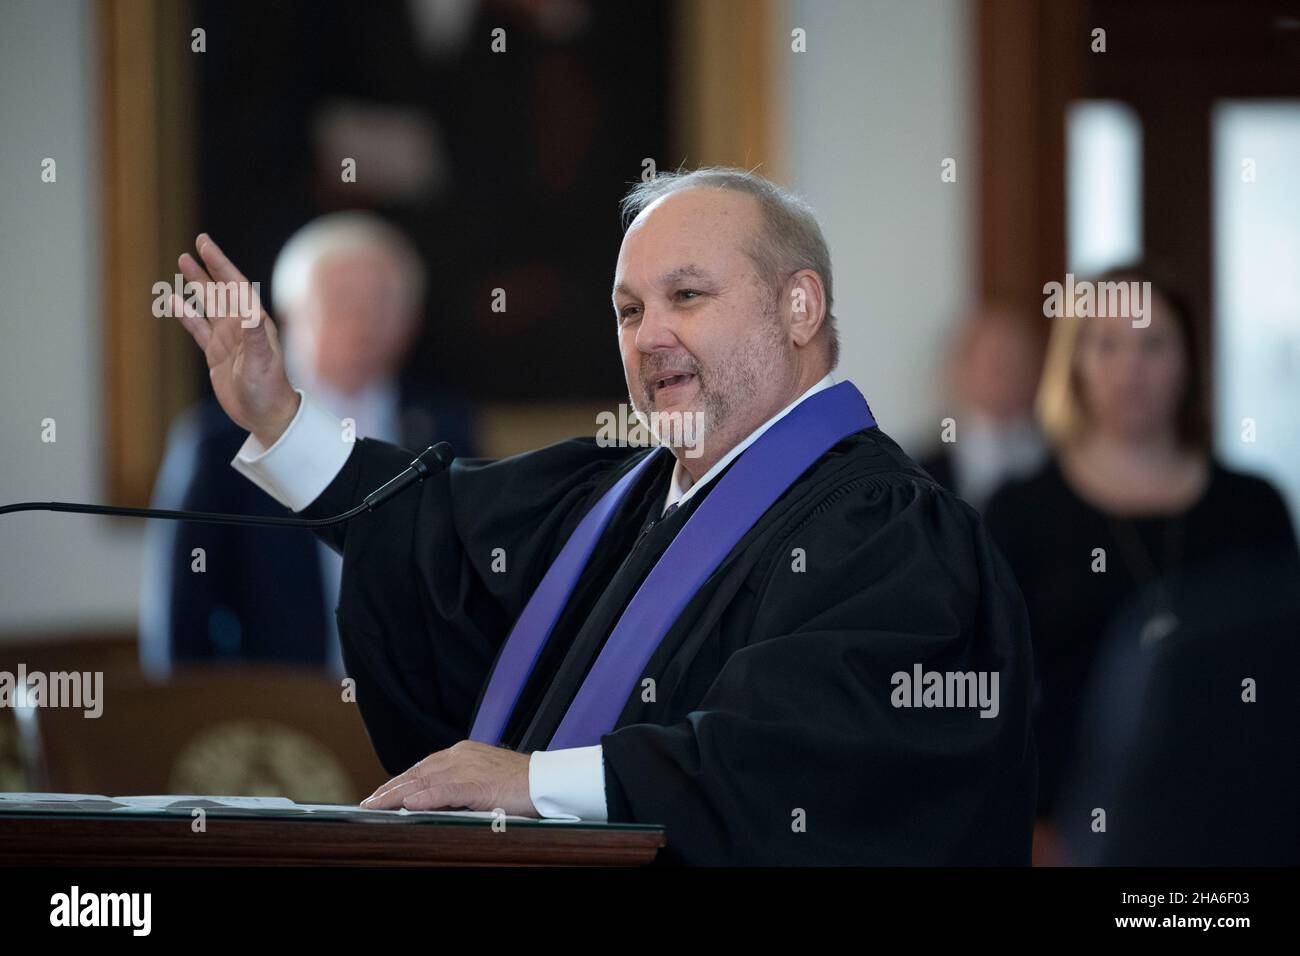 Austin Texas USA, Dec. 10 2021: Presbyterian pastor Gregory Davidson speaks at an investiture ceremony for new Texas Supreme Court Justice Rebecca A. Huddle at the Texas Capitol. Huddle has been on the court for a year but her formal swearing-in ceremony was delayed due to COVID protocols. Credit: Bob Daemmrich/Alamy Live News Stock Photo